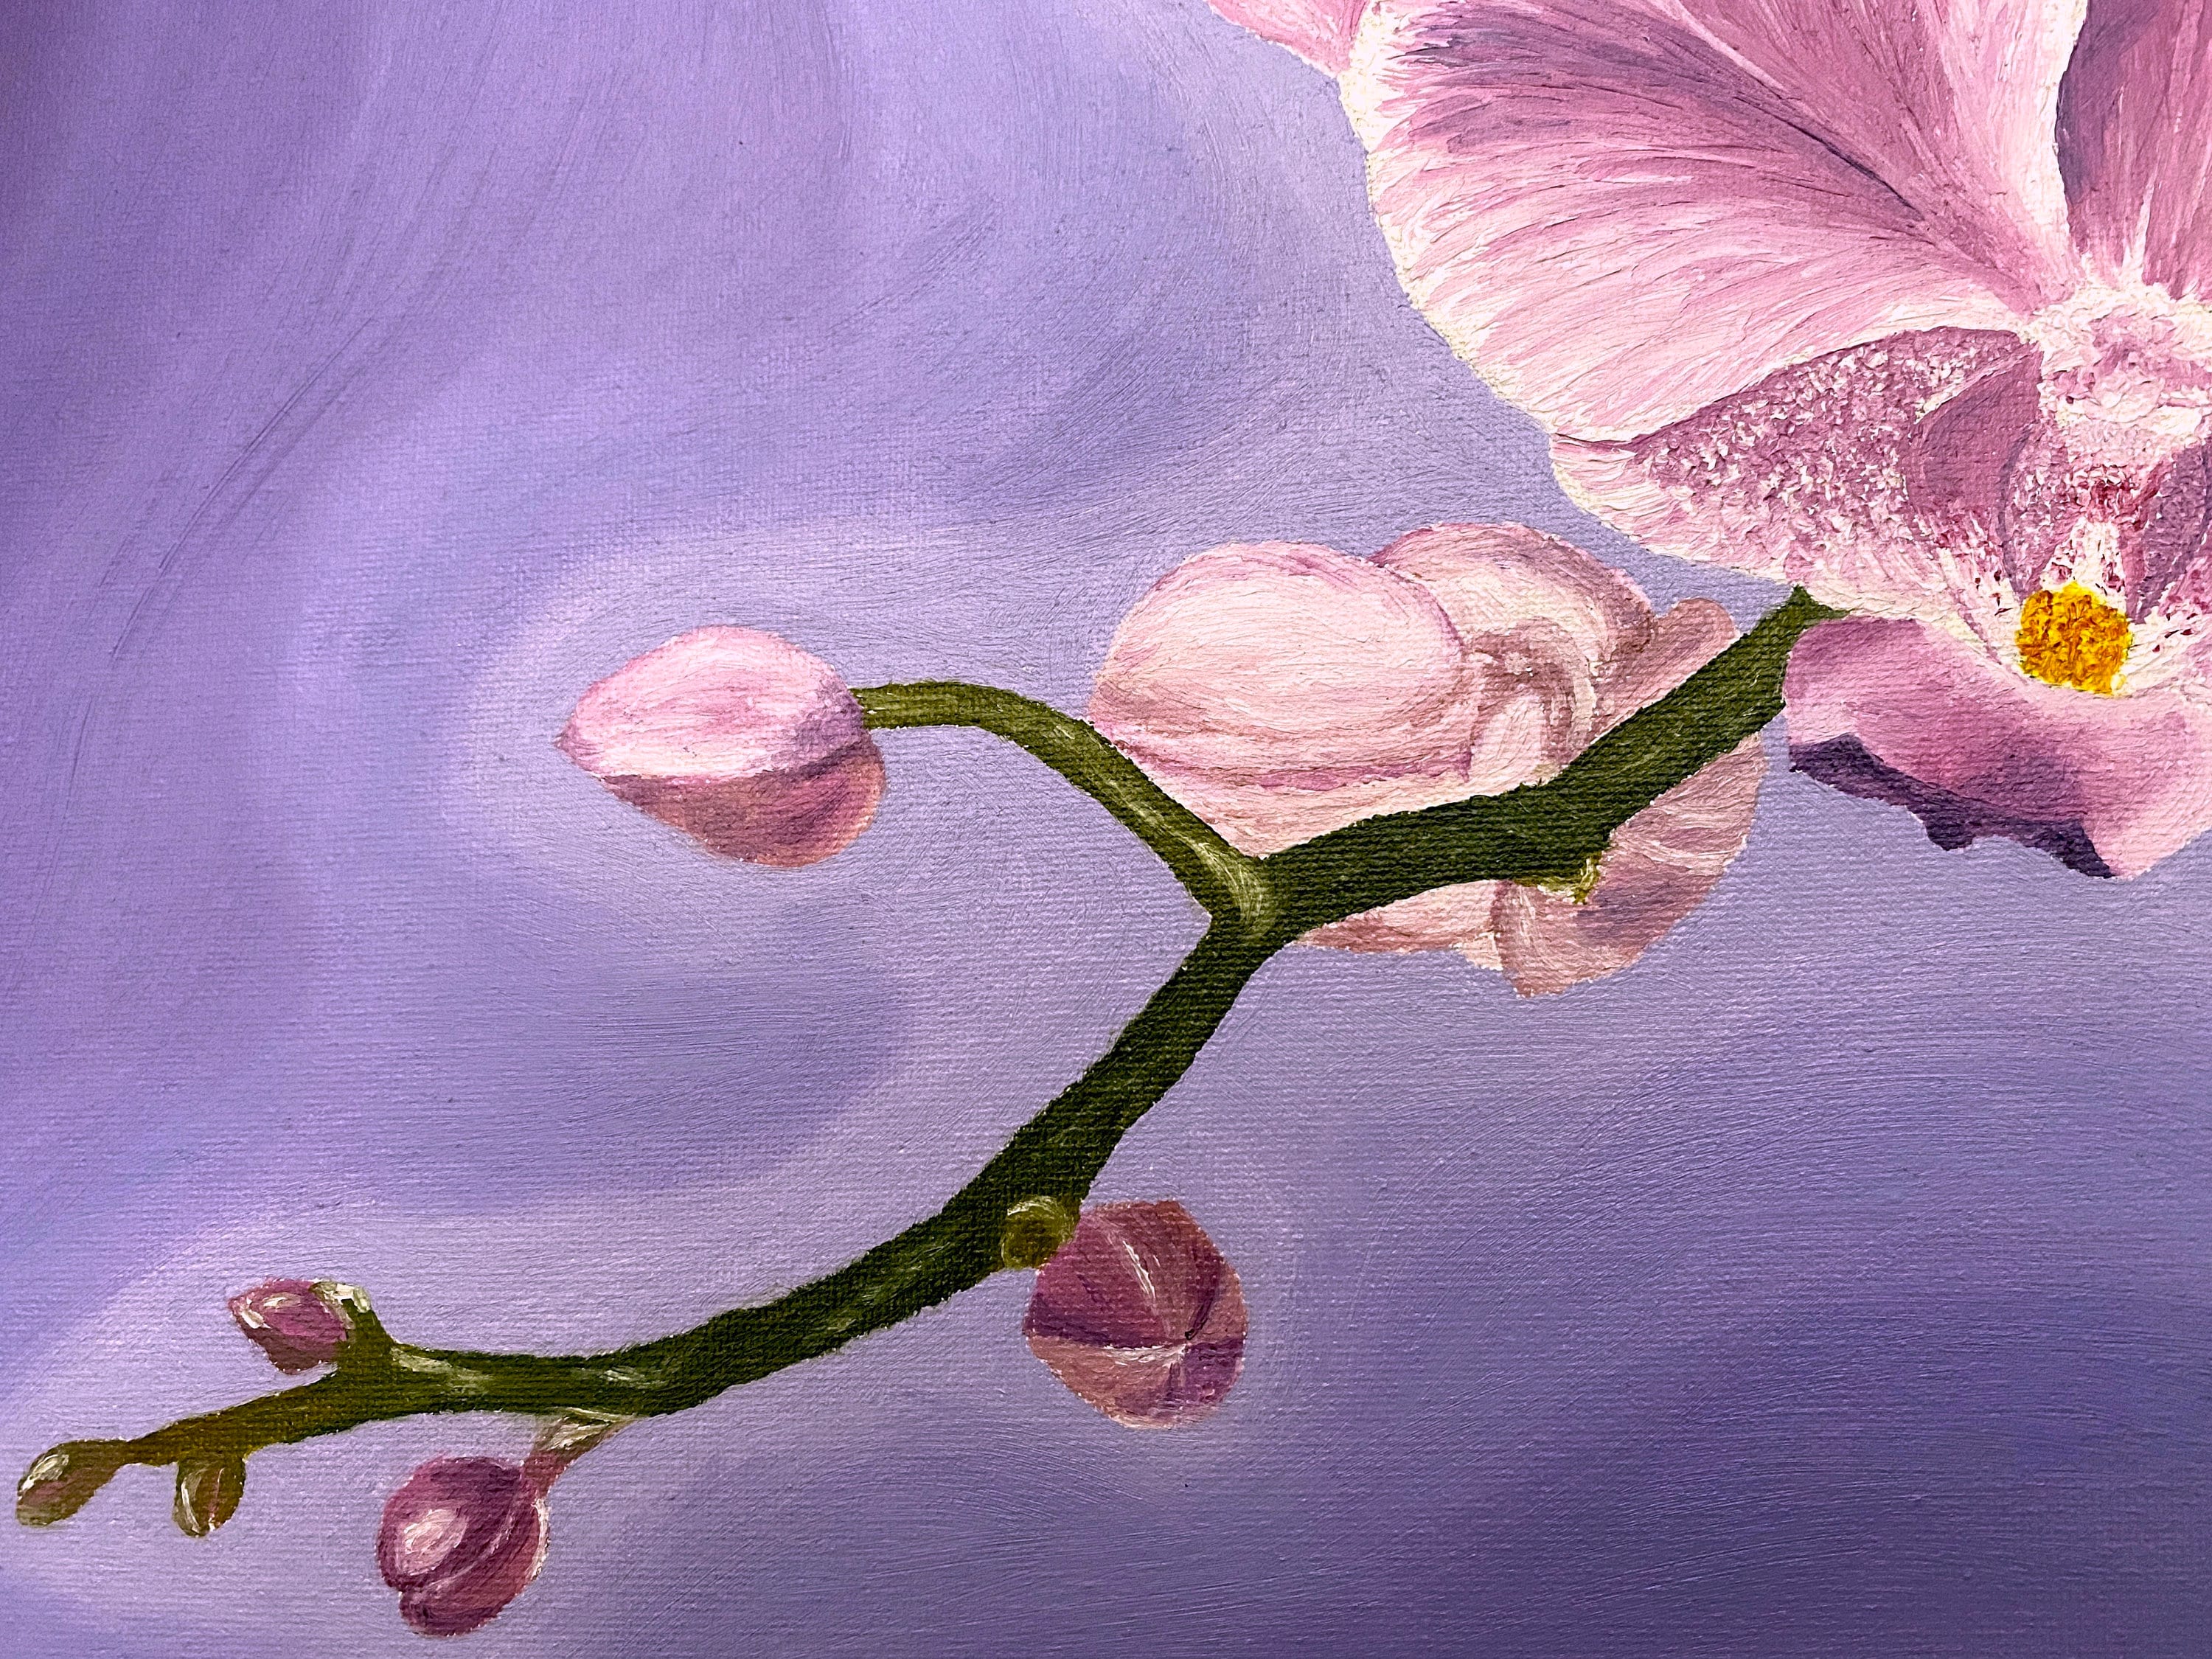 Pink/Purple Orchid Flower Diamond Art Painting UNFRAMED 40x30cm COMPLETED